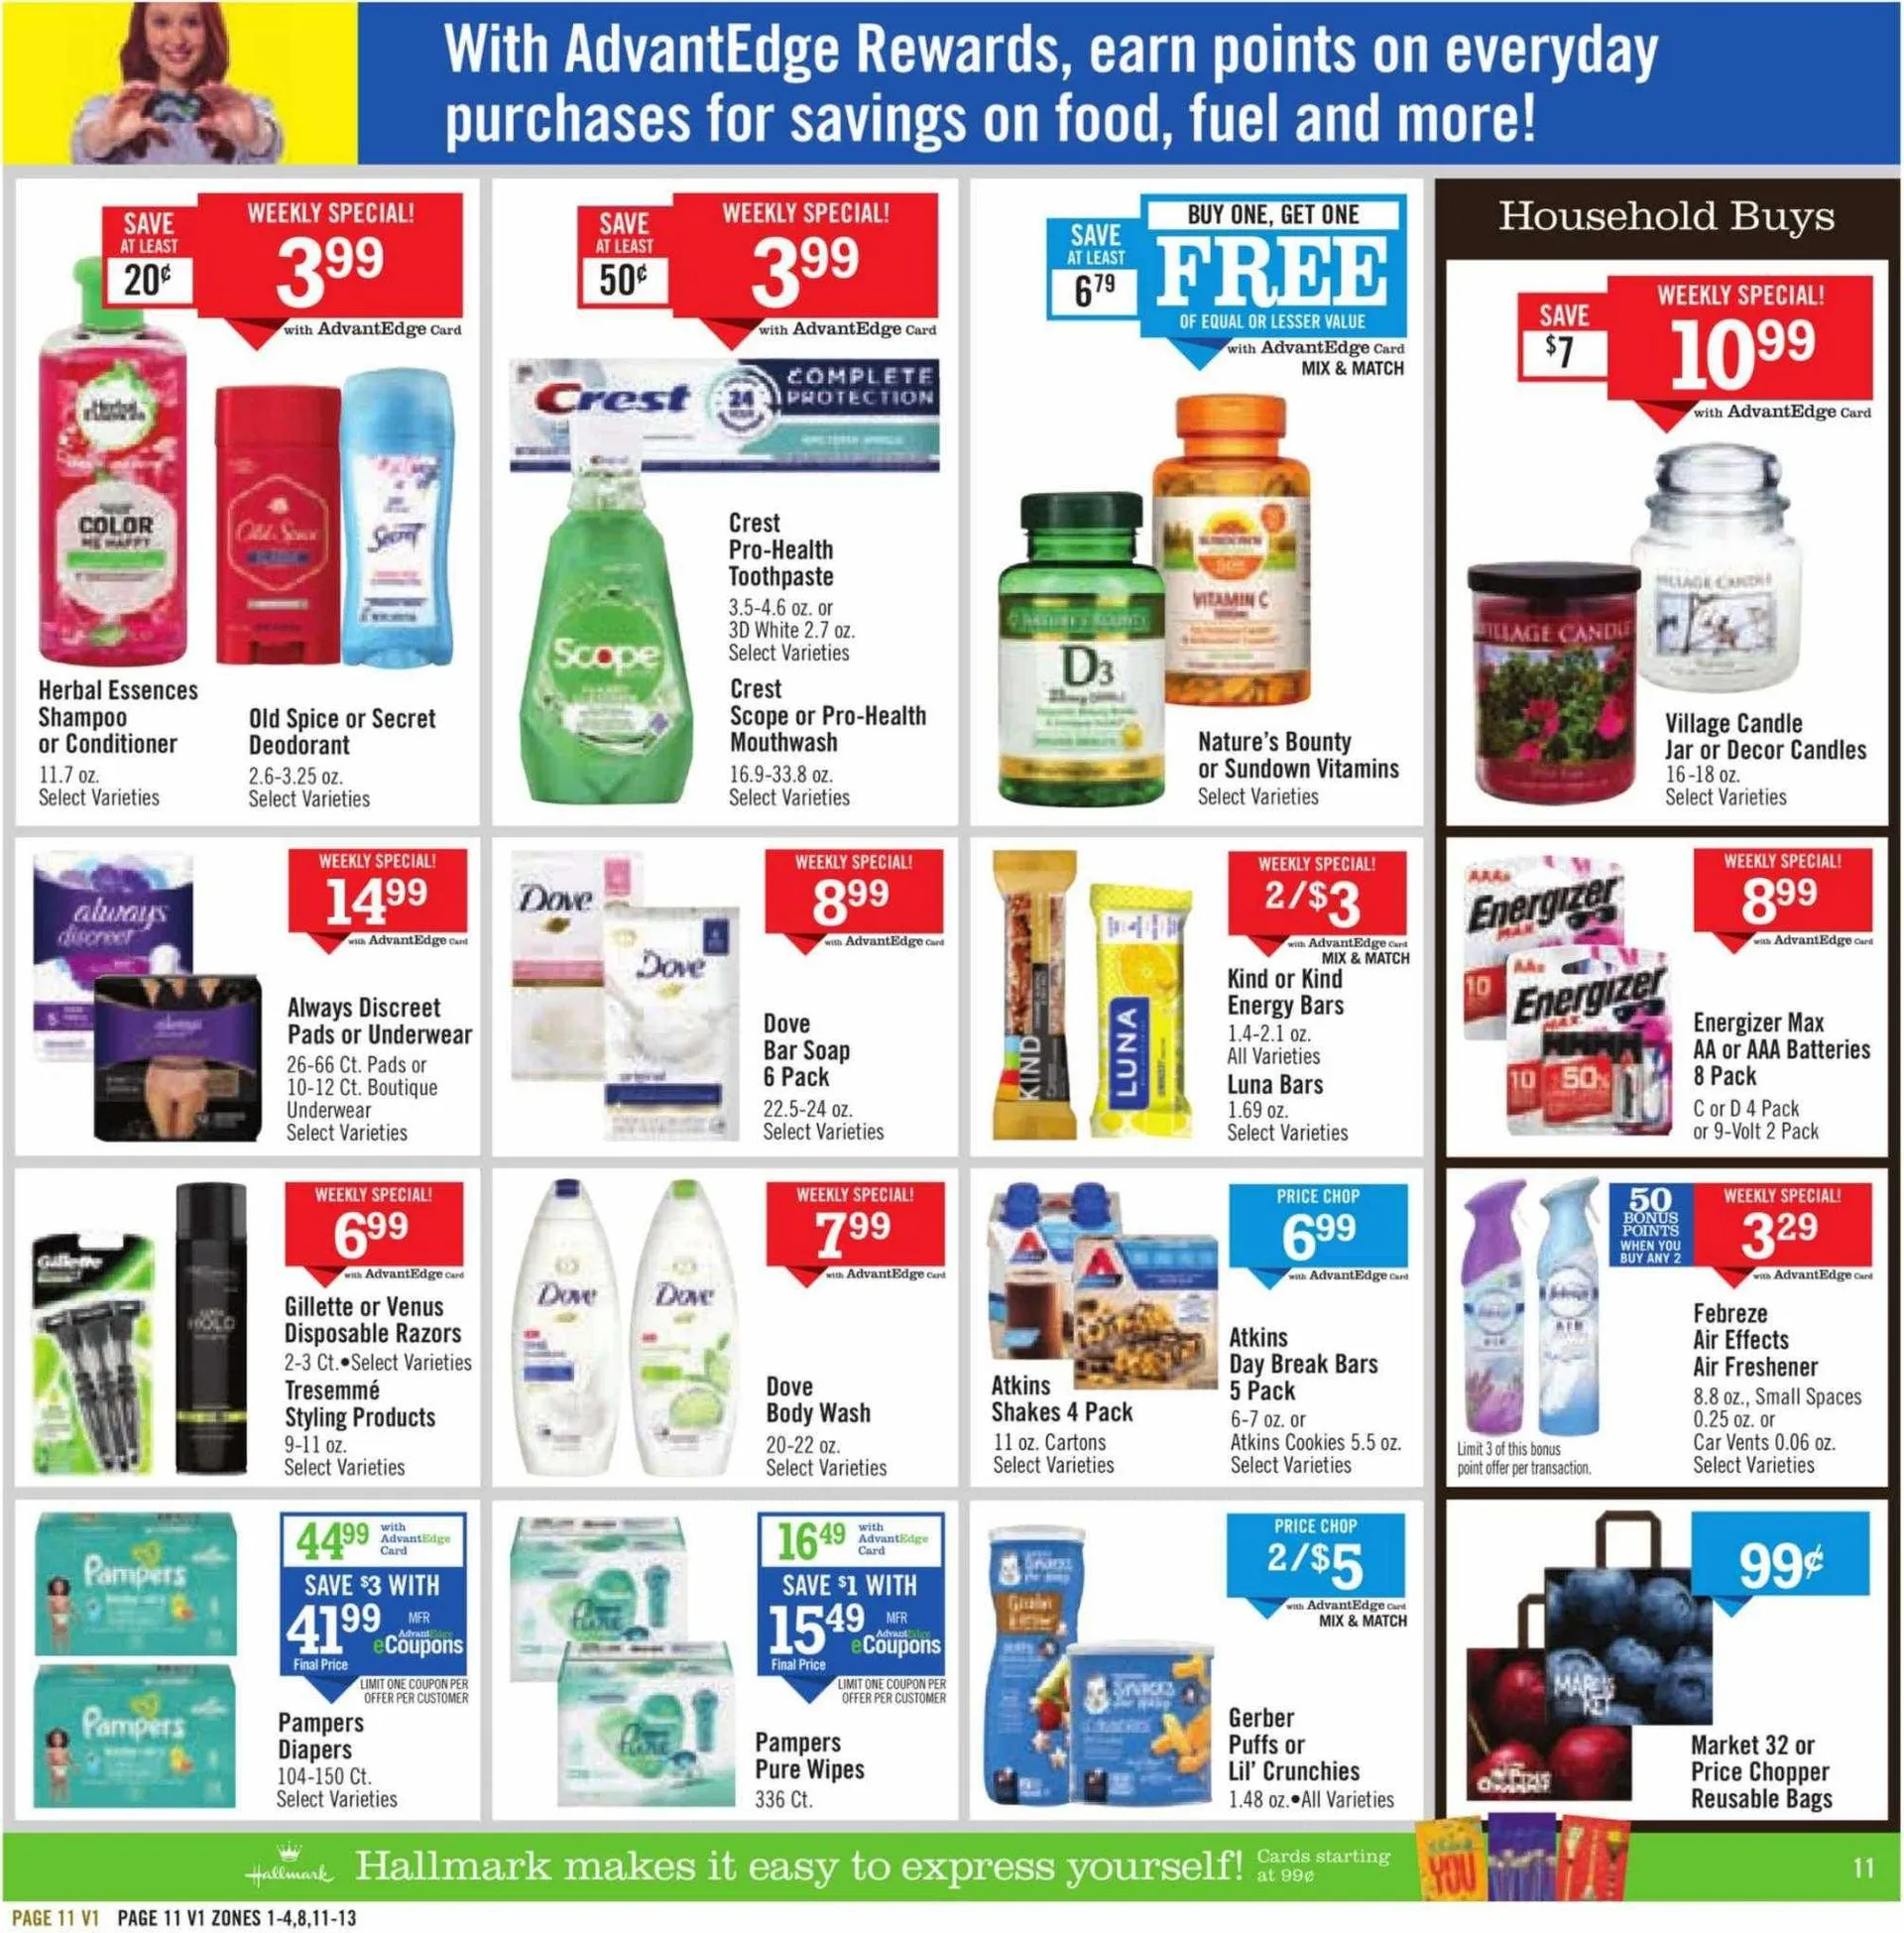 Price Chopper Weekly Ad - 11